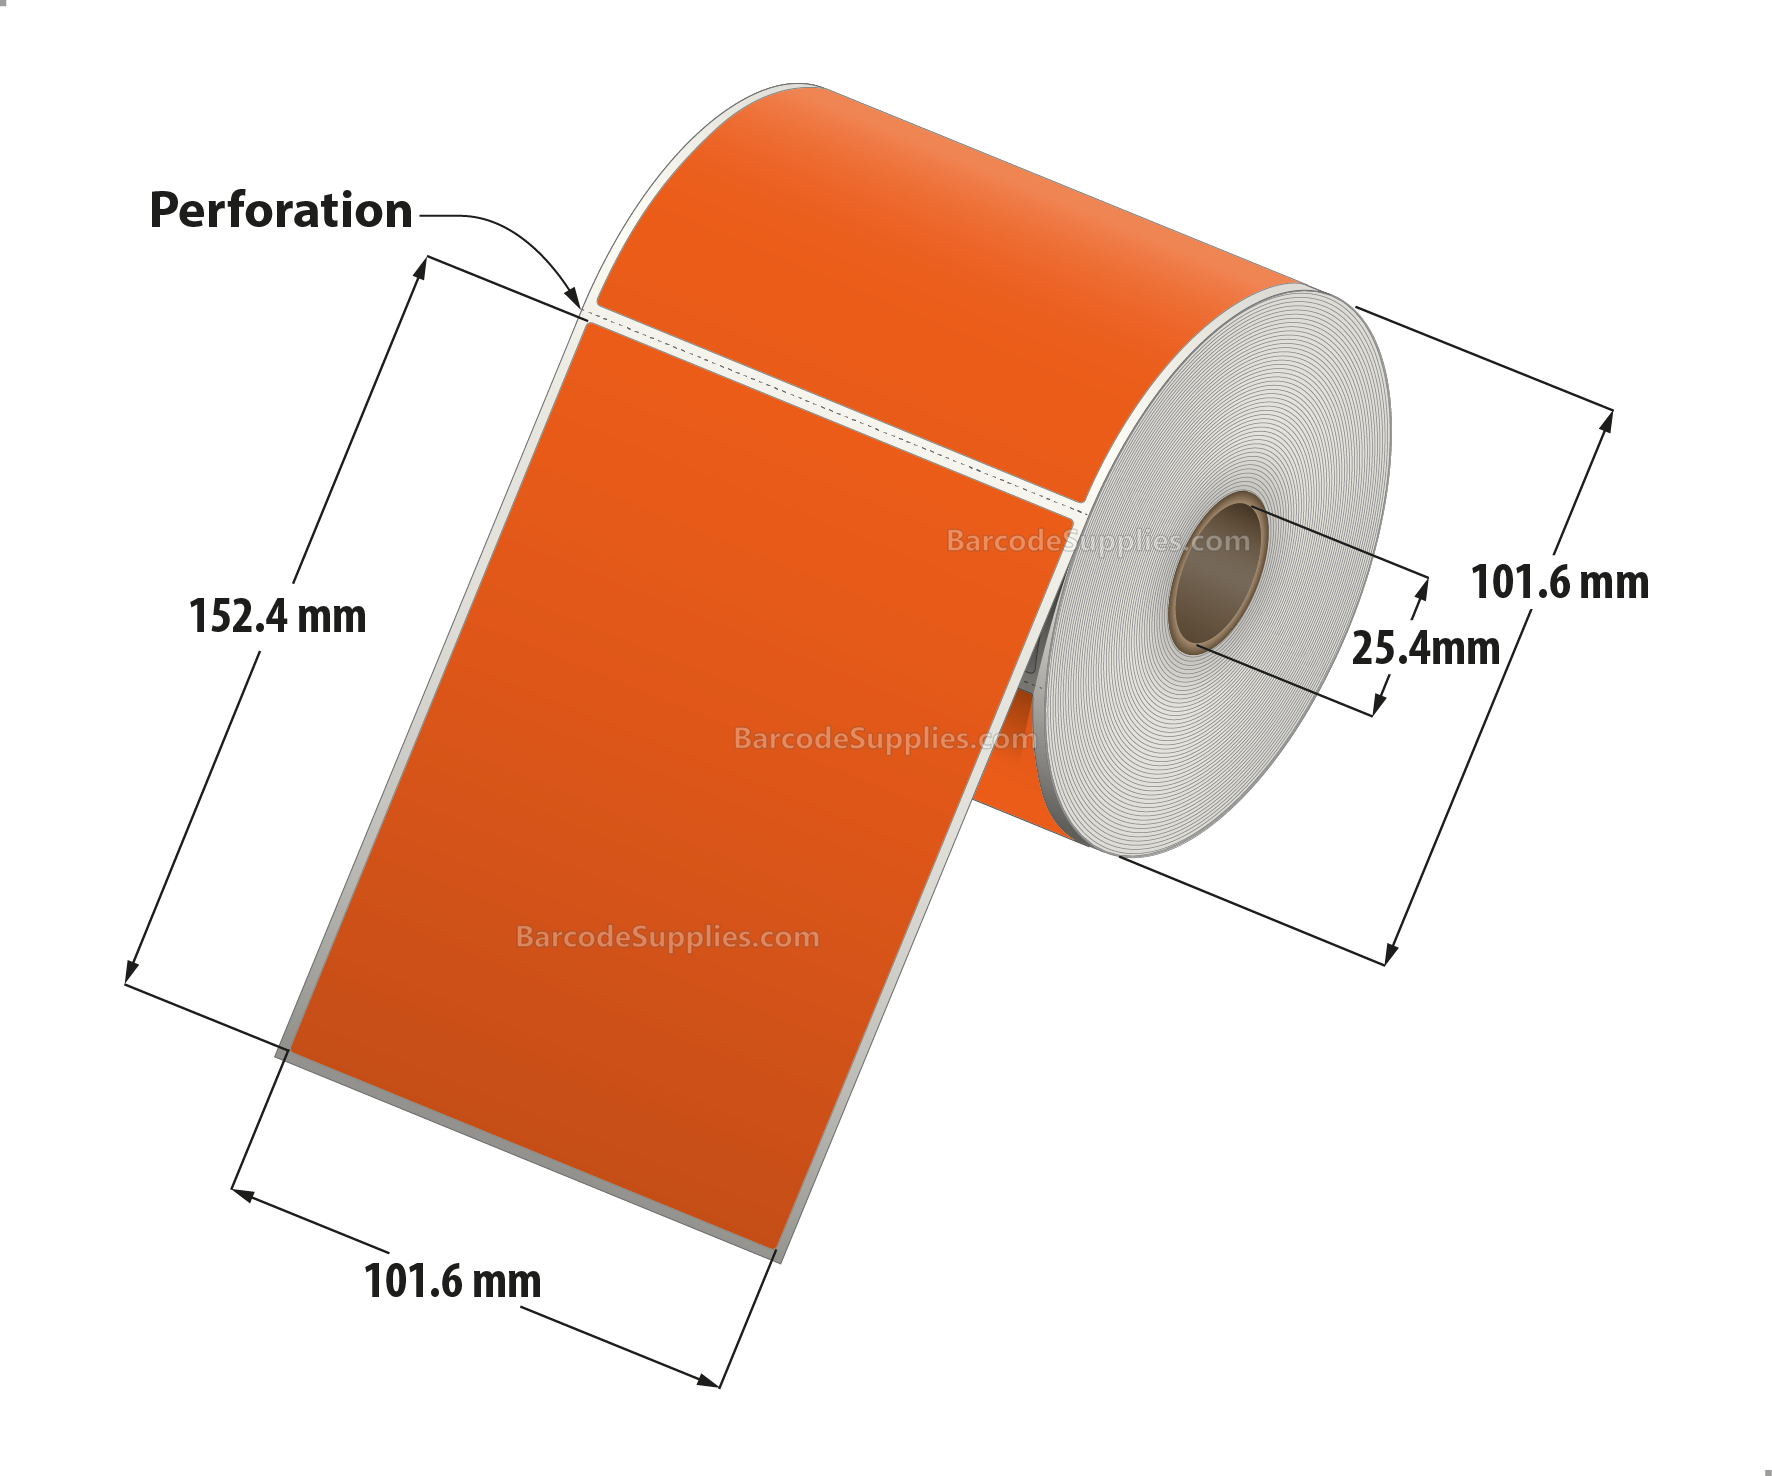 4 x 6 Thermal Transfer 1495 Orange Labels With Permanent Adhesive - Perforated - 250 Labels Per Roll - Carton Of 12 Rolls - 3000 Labels Total - MPN: RFC-4-6-250-OR